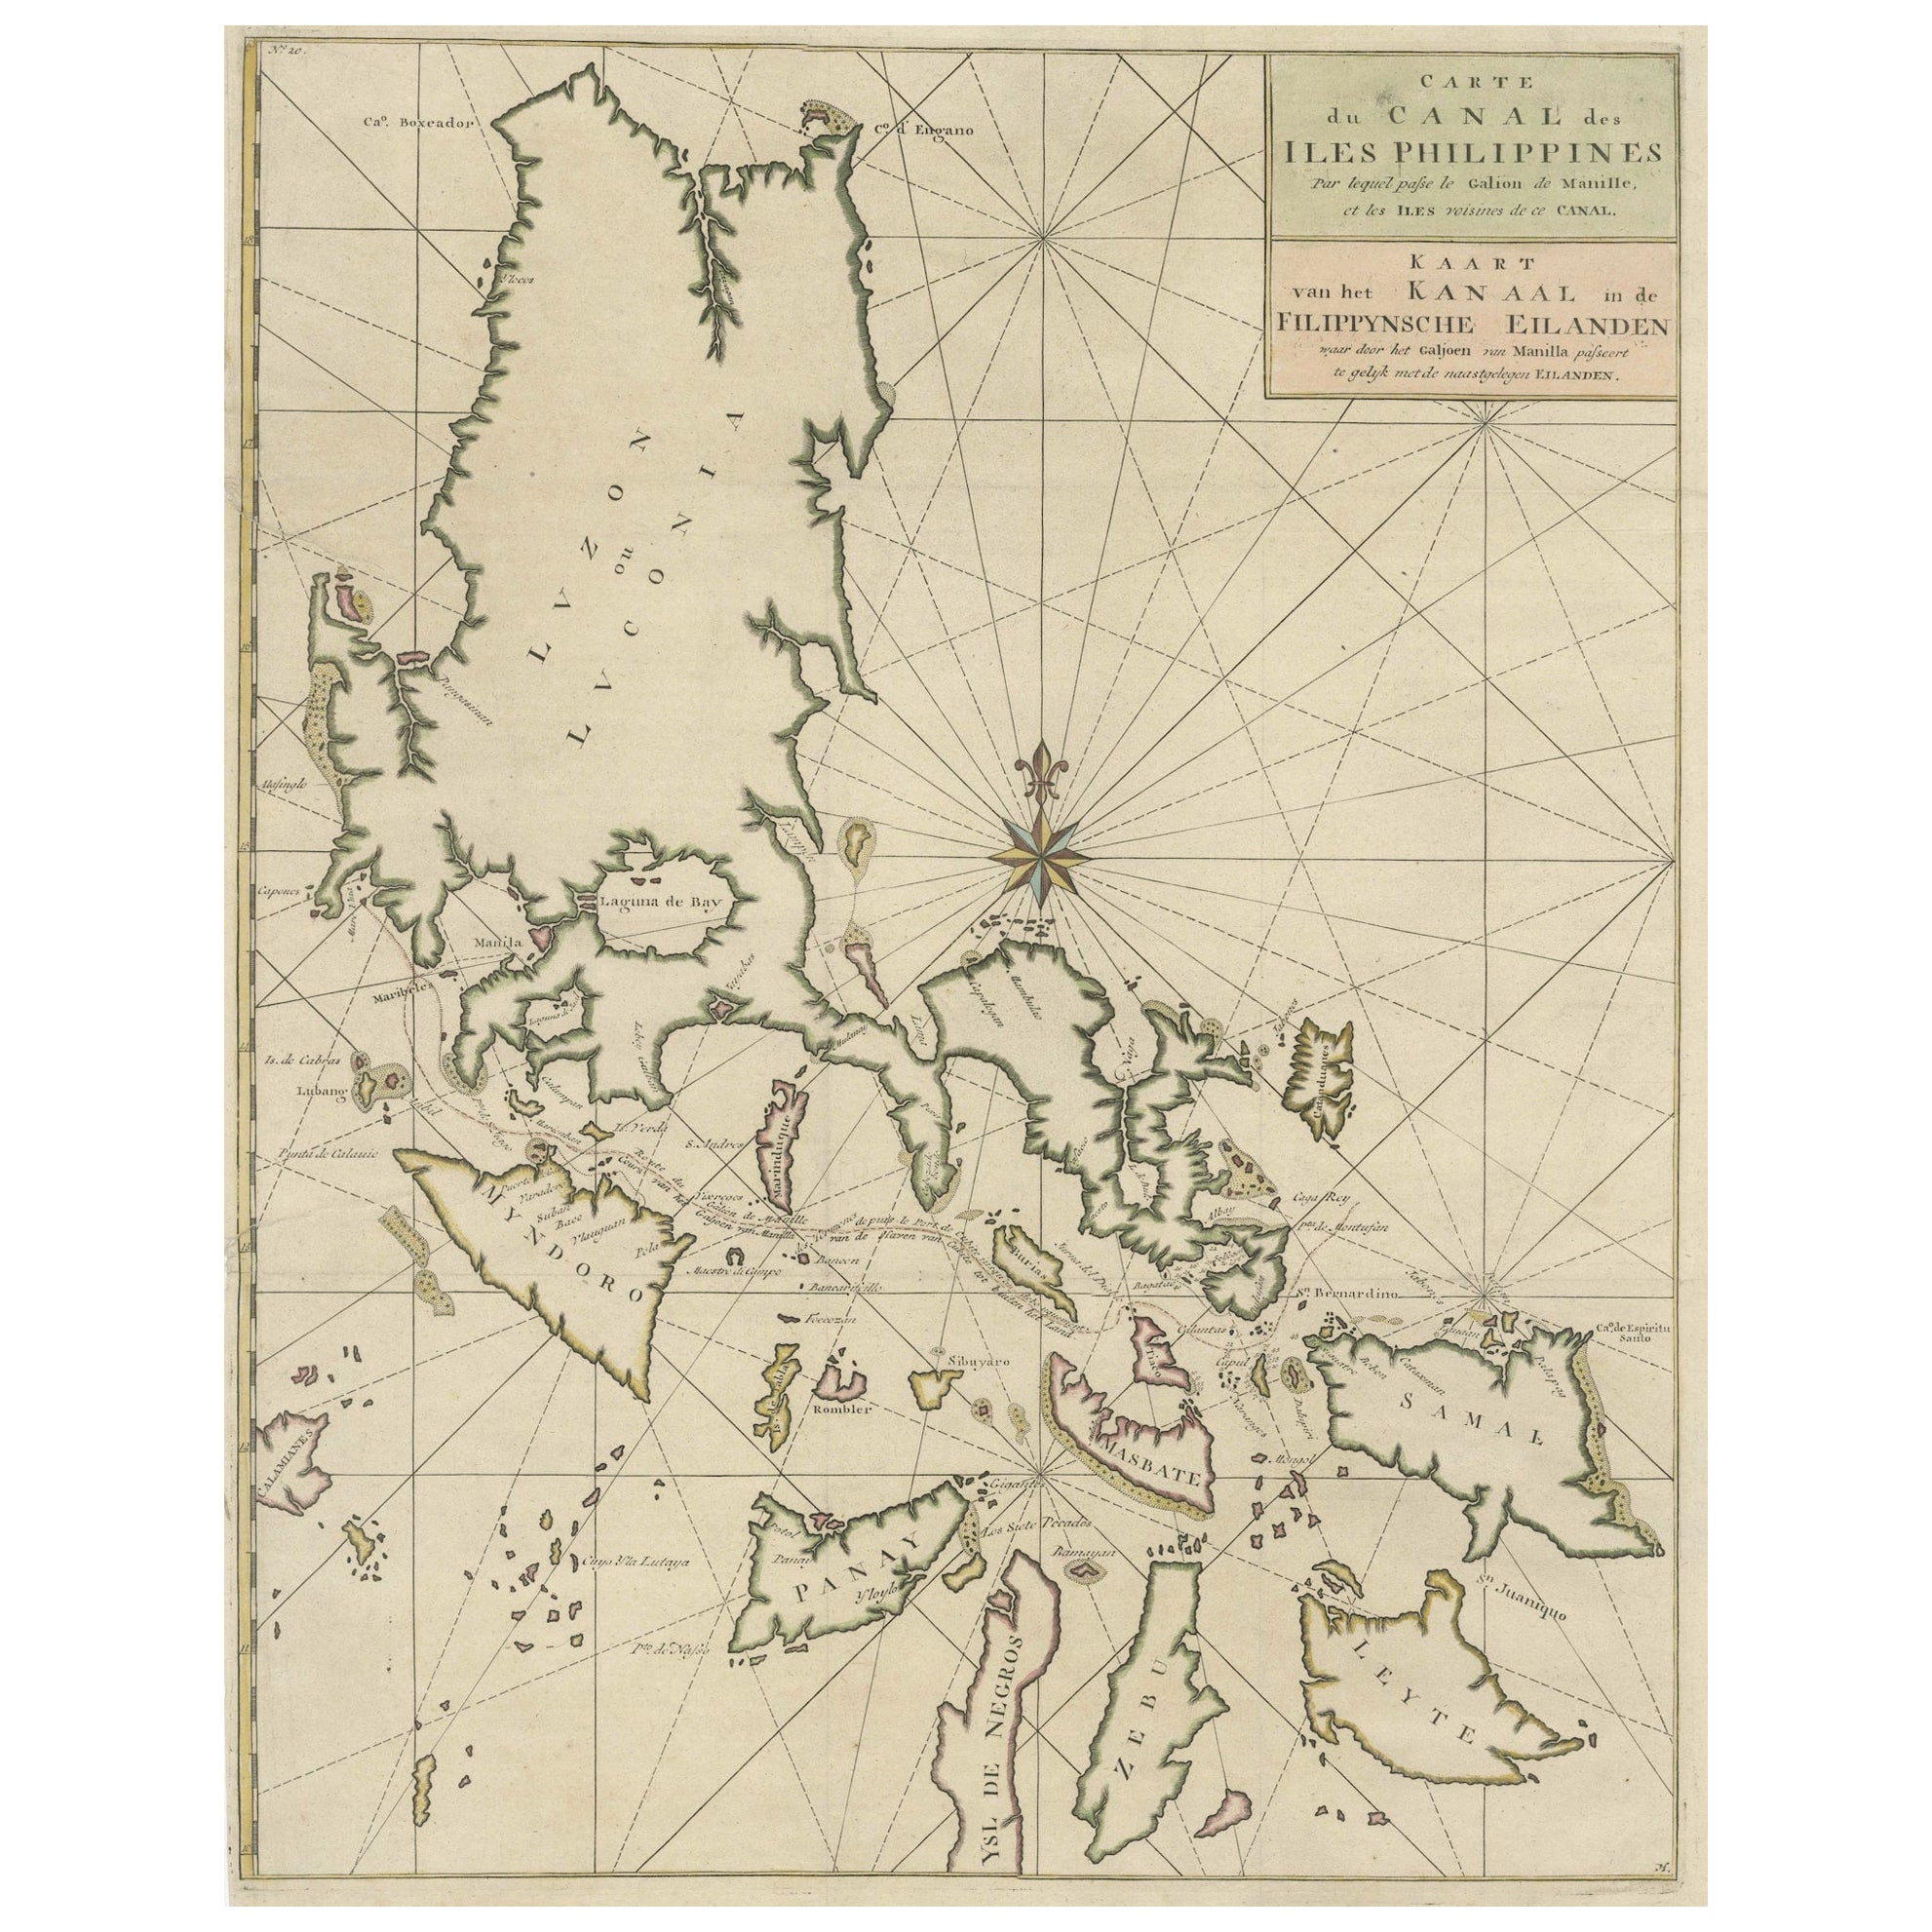 Original Old Map with Many Details Around Manilla in the Philippine Islands For Sale